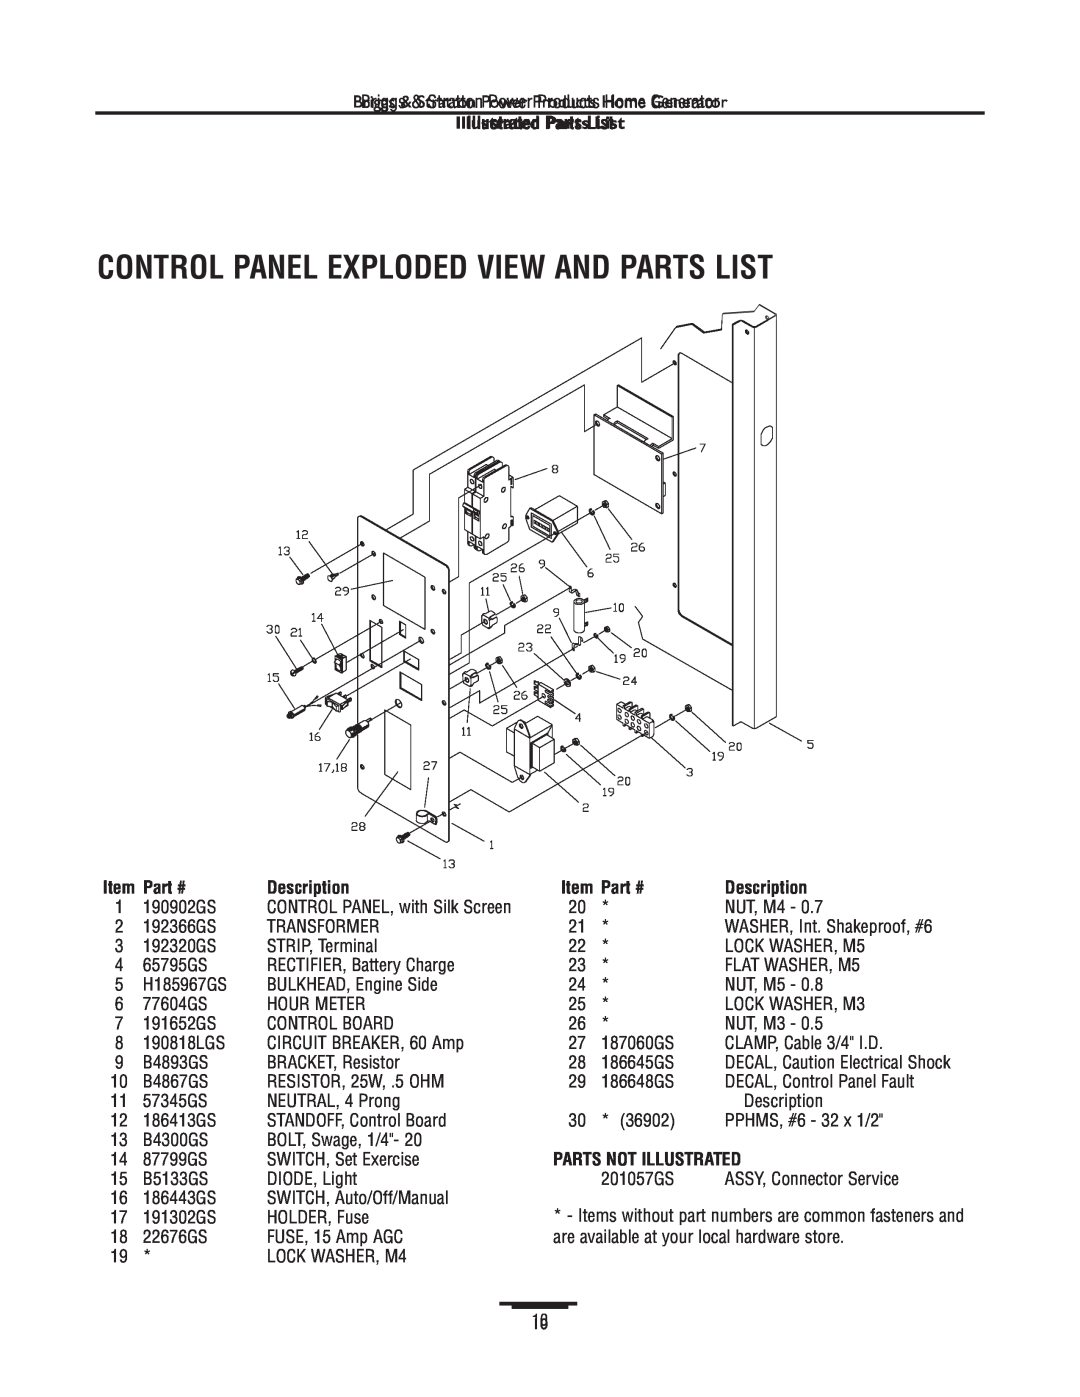 Briggs & Stratton 1815 Control Panel Exploded View And Parts List, Parts Not Illustrated, Illustrated PartsList, Part # 